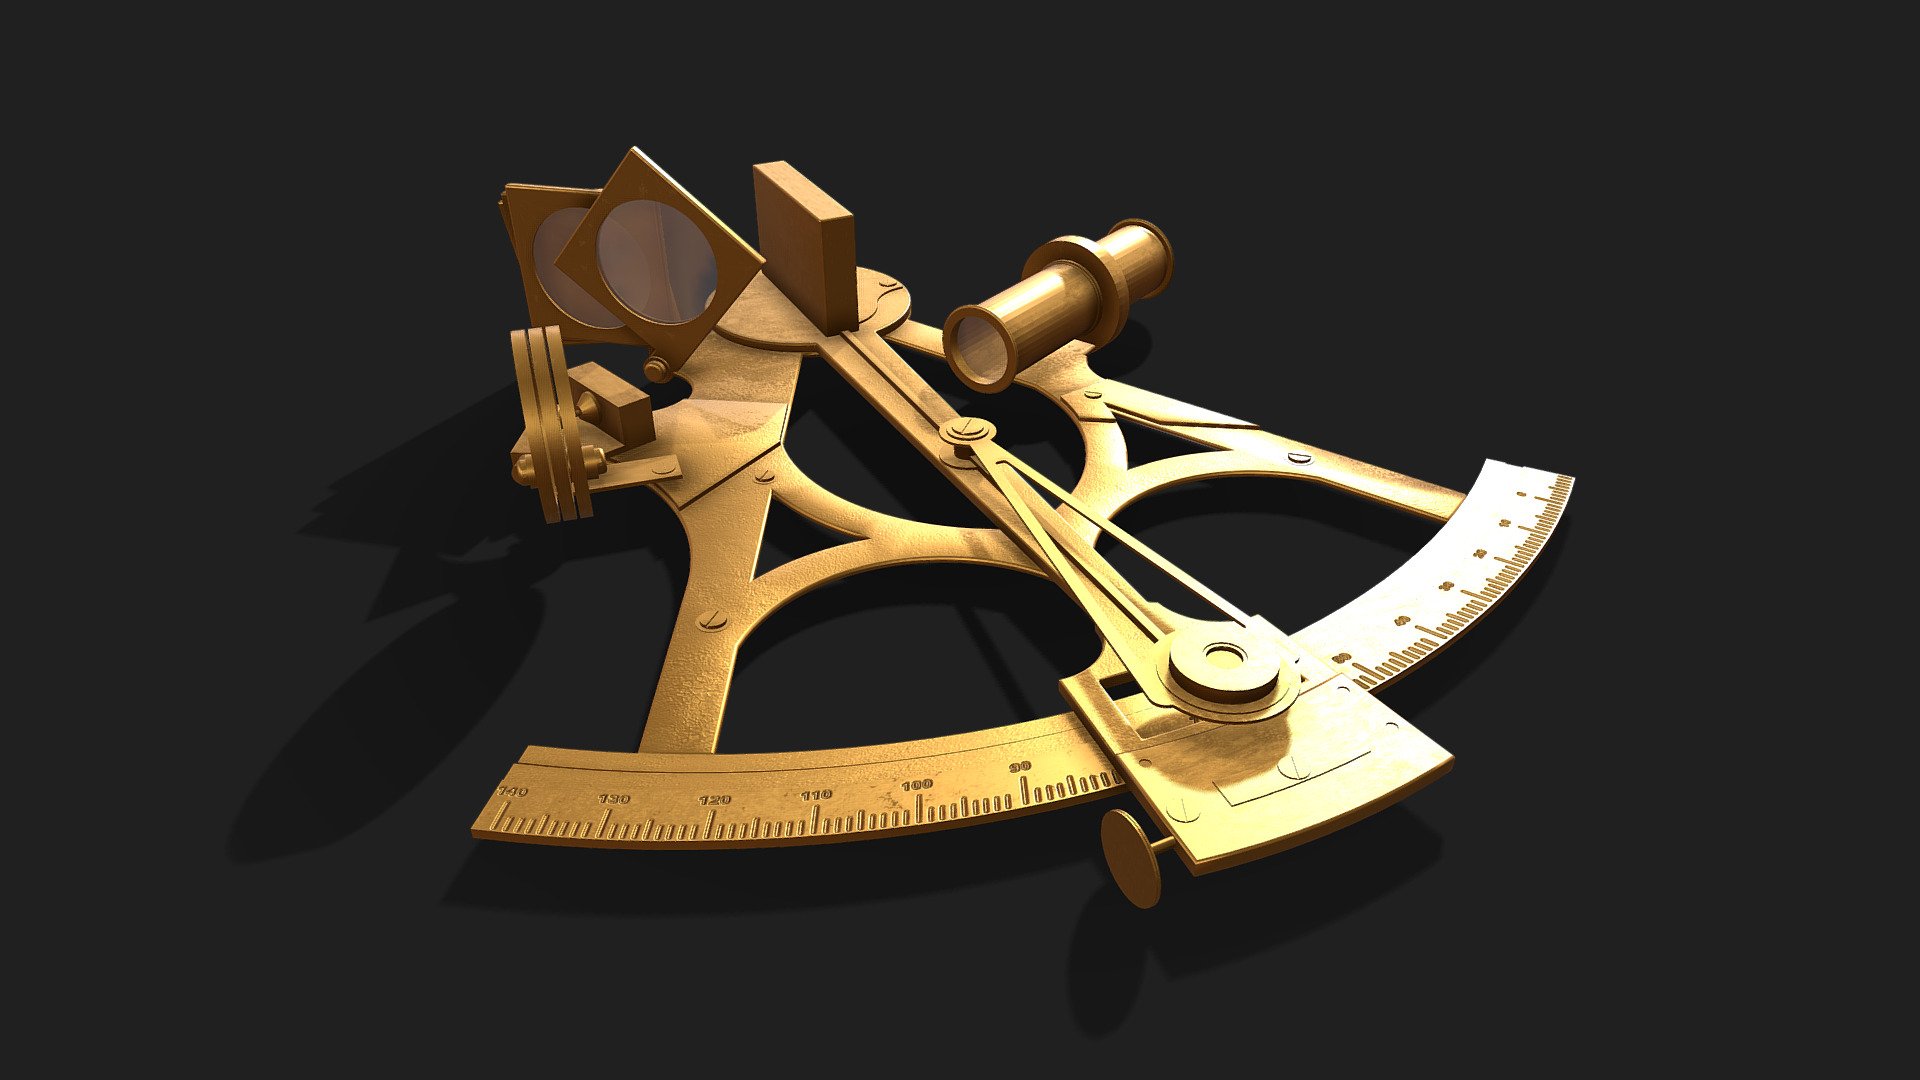 Sextant 3d model

Geometry: Polygon T
extures: Yes 
Materials: Yes 
Rigged: No 
Animated: No 
UV Mapped: Yes - Sextant - 3D model by Farnem (@skiffffx) 3d model